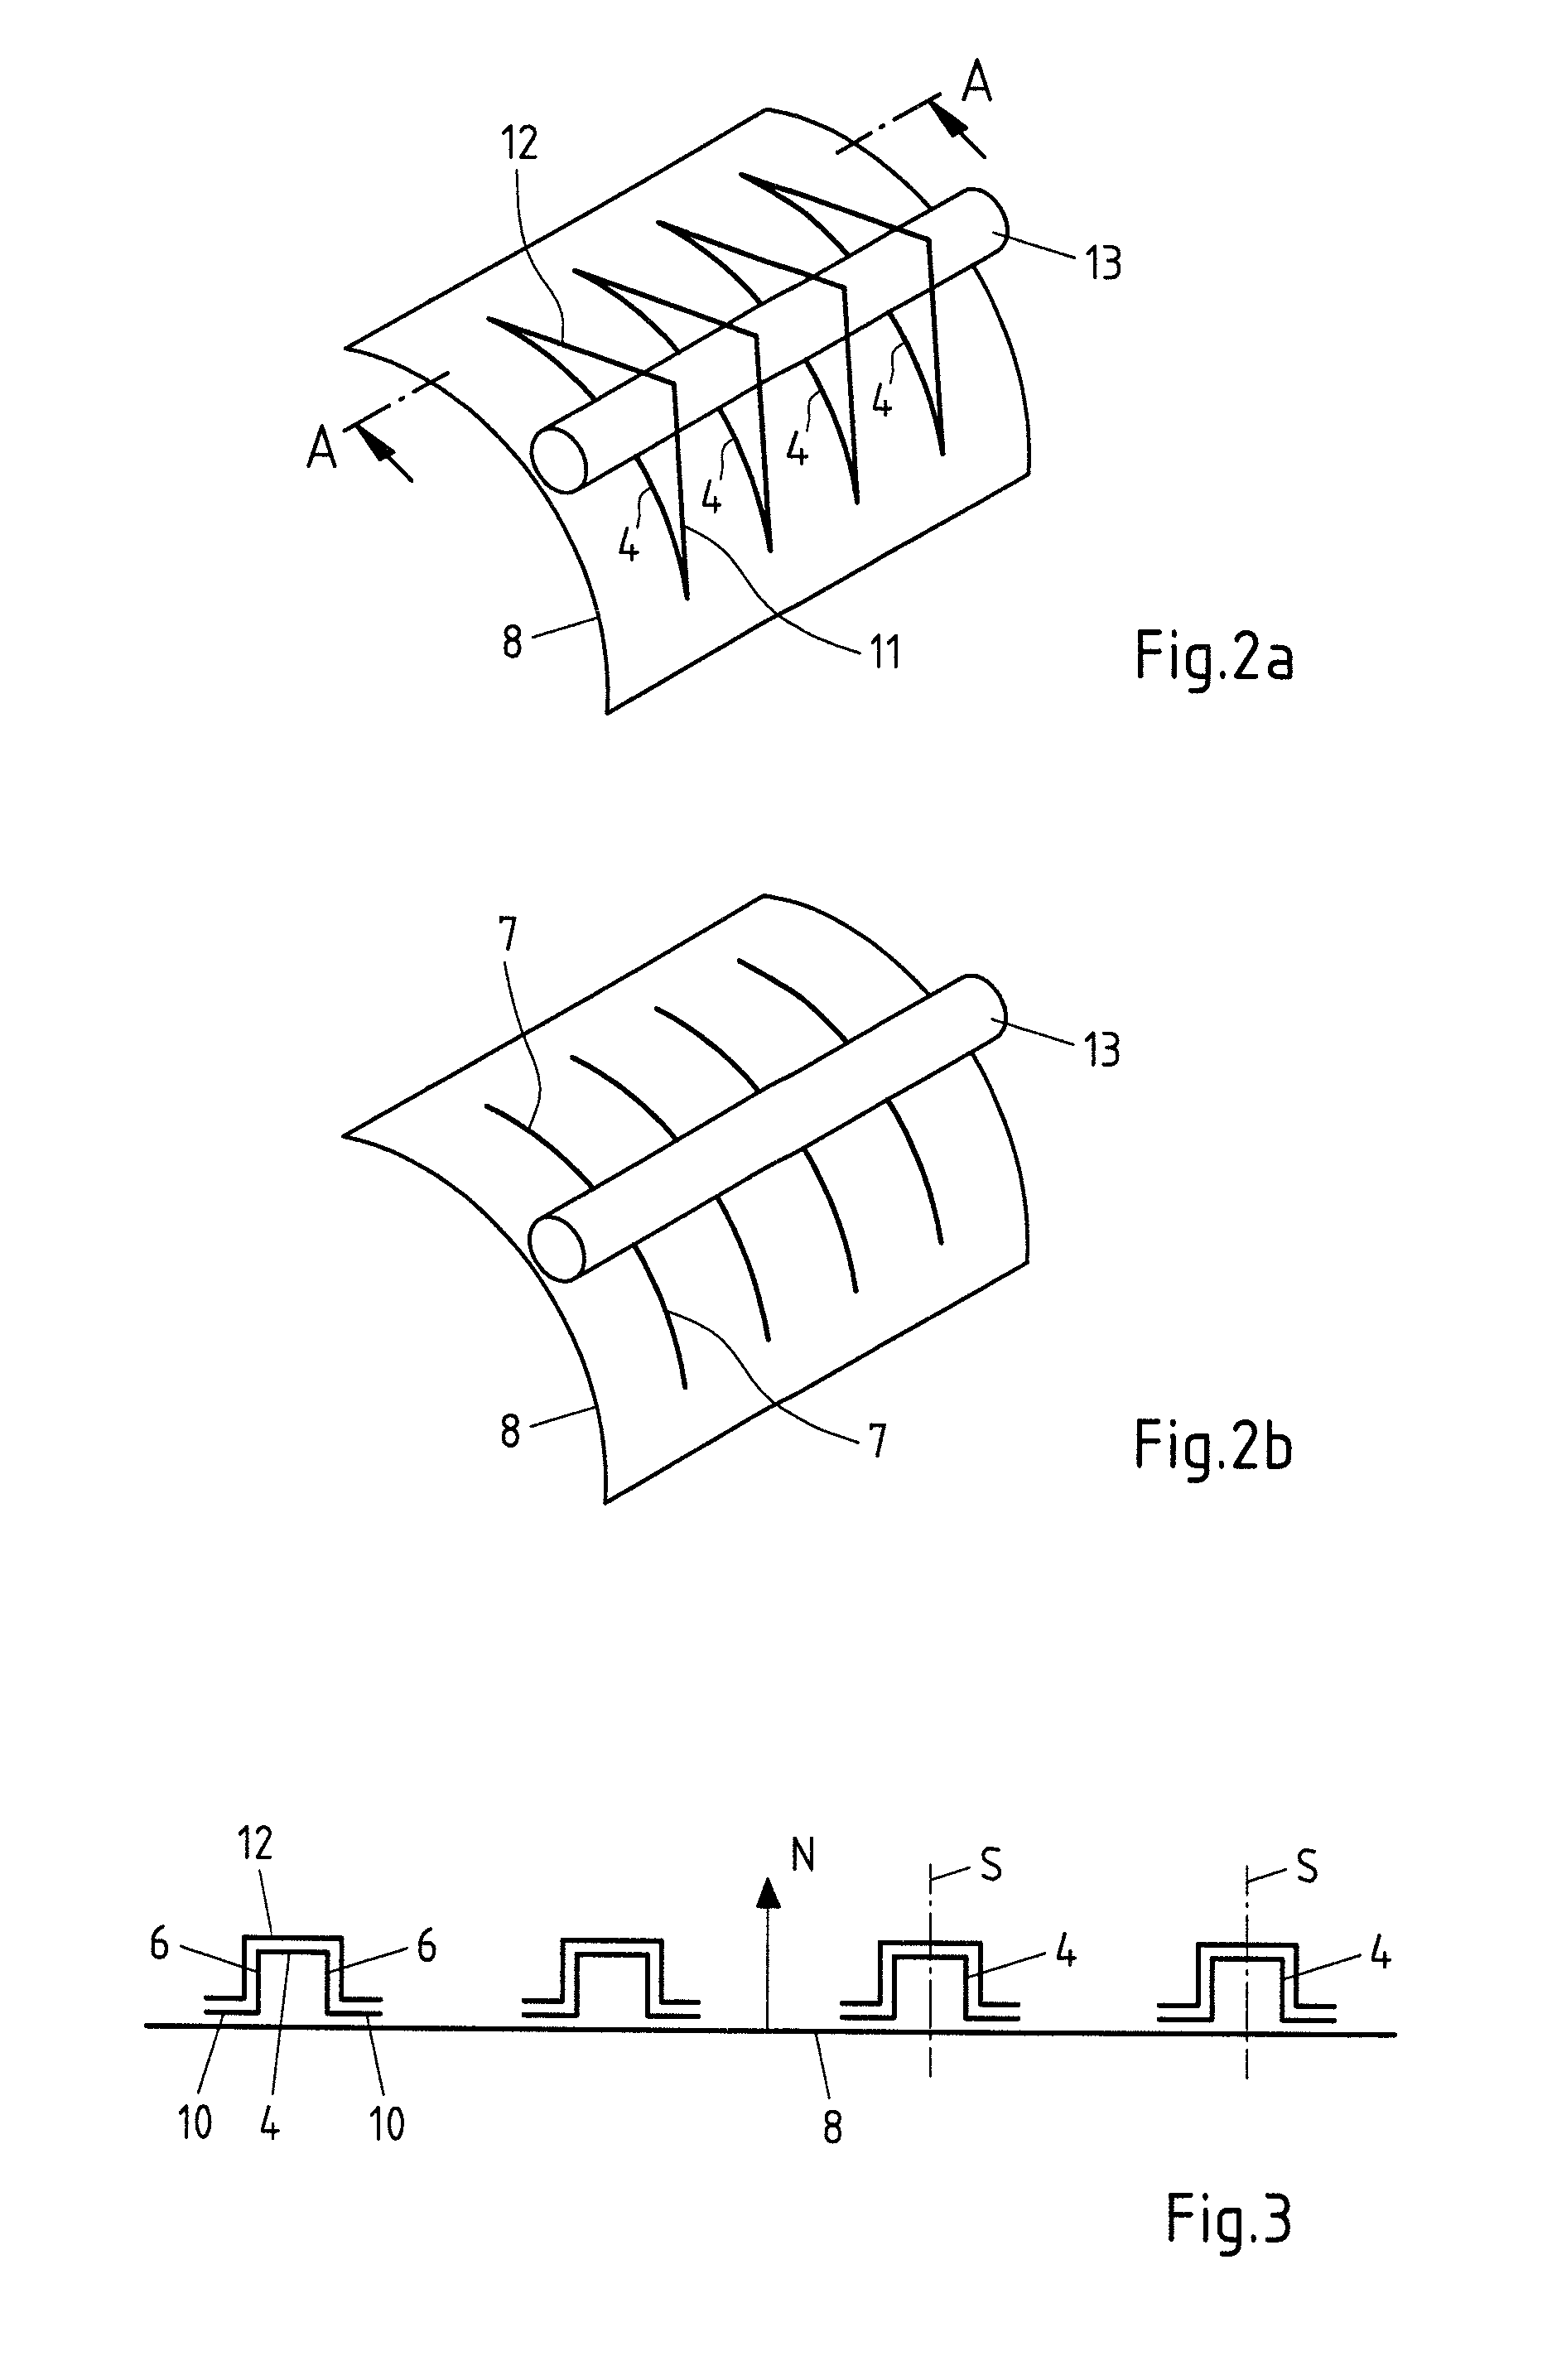 Supporting Device for a Curved Mirror